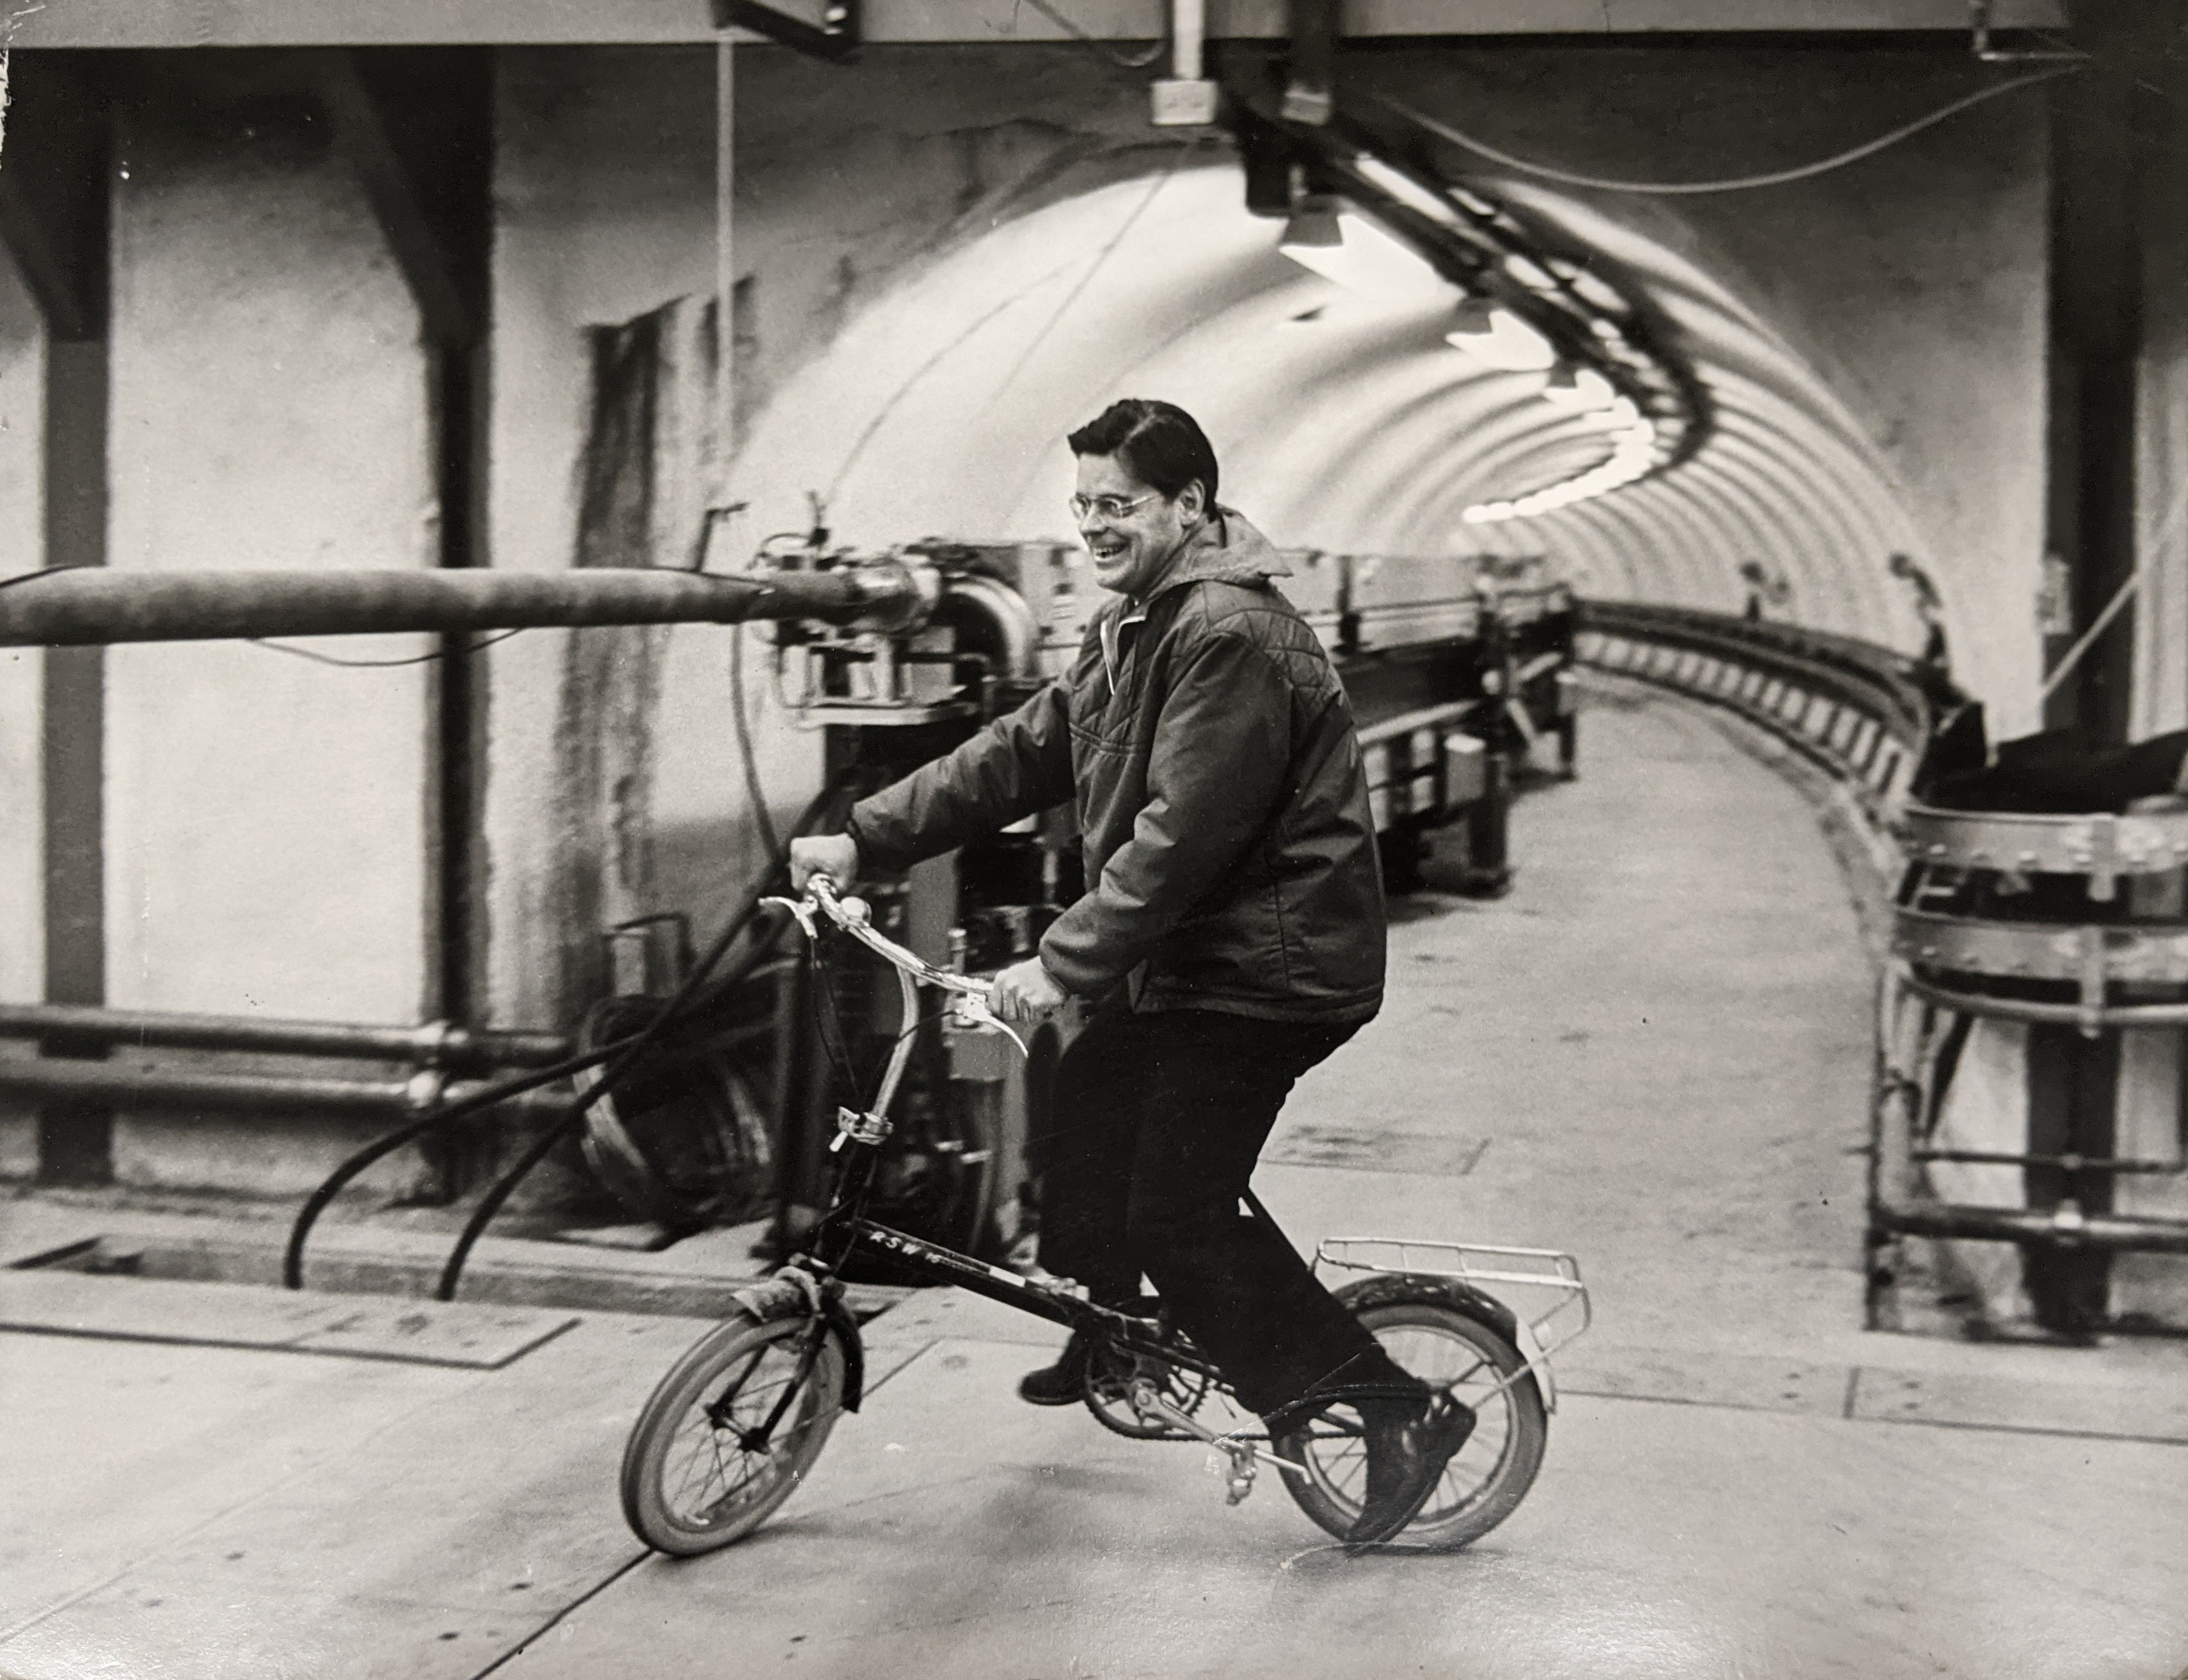 image of a man on a bike in a tunnel